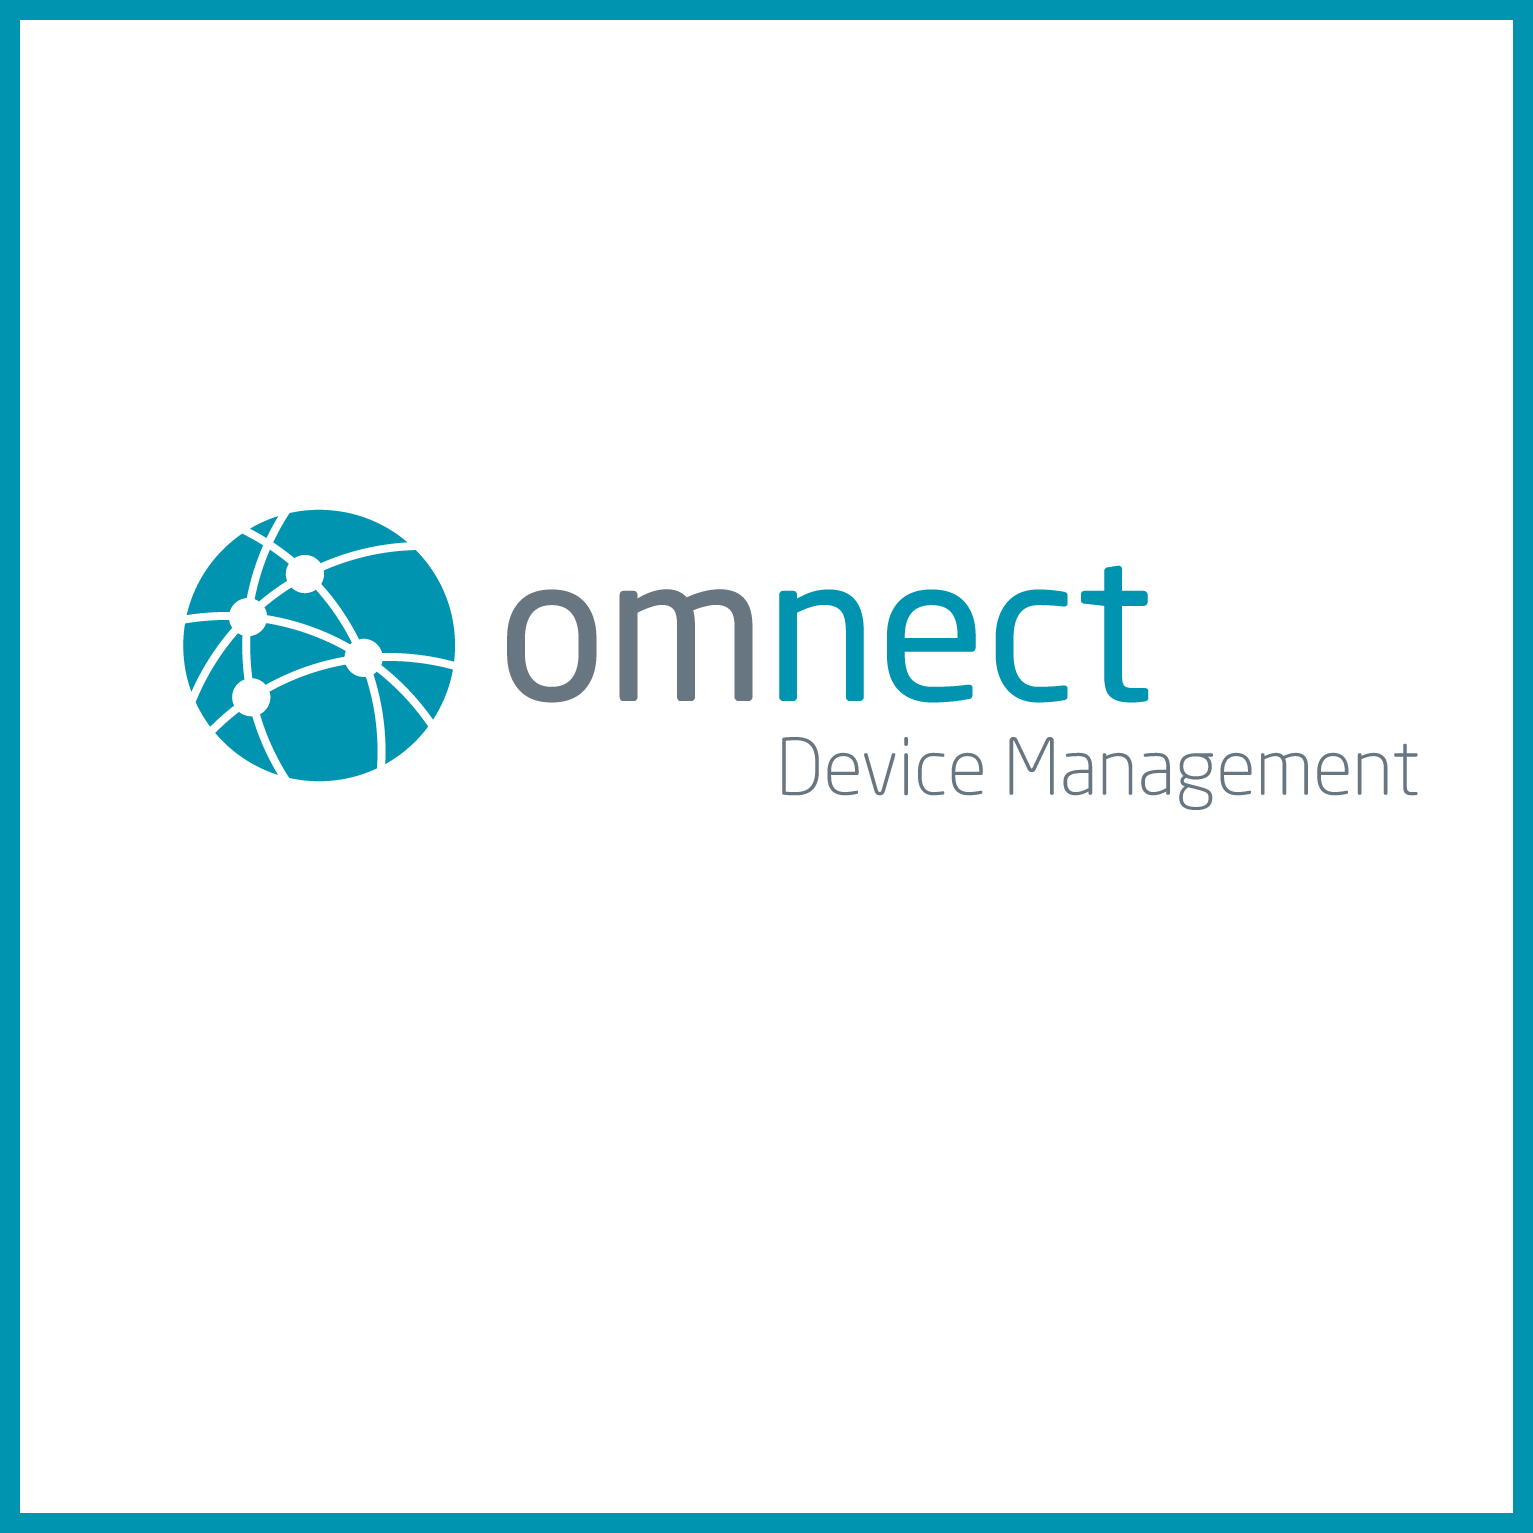 omnect Device Management powered by FLECS